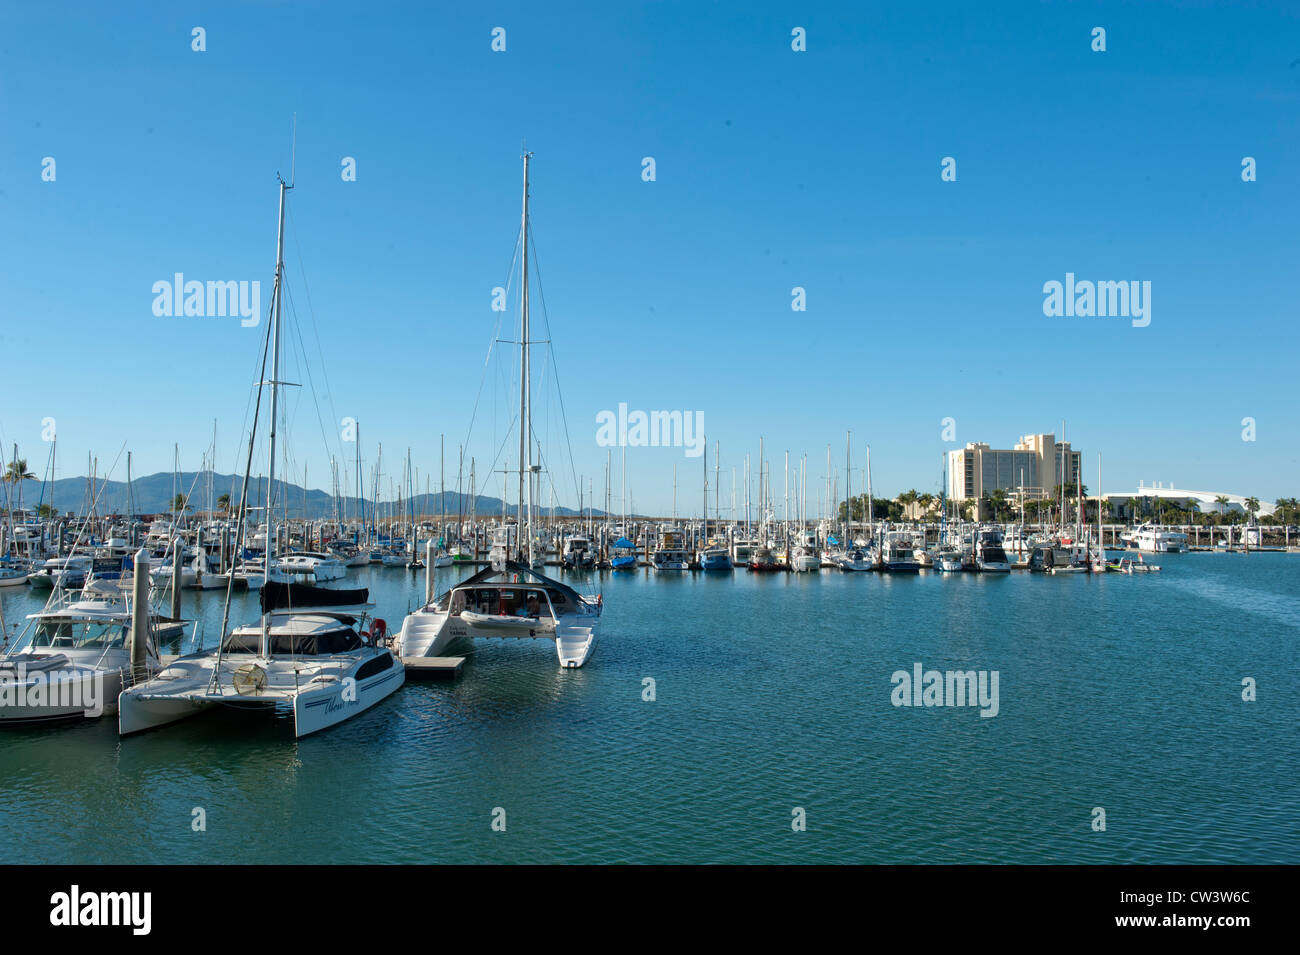 Breakwater Marina with yachts, sailboats, and motorboats at The Strand, the beach promenade of Townsville, Far North Queensland Stock Photo